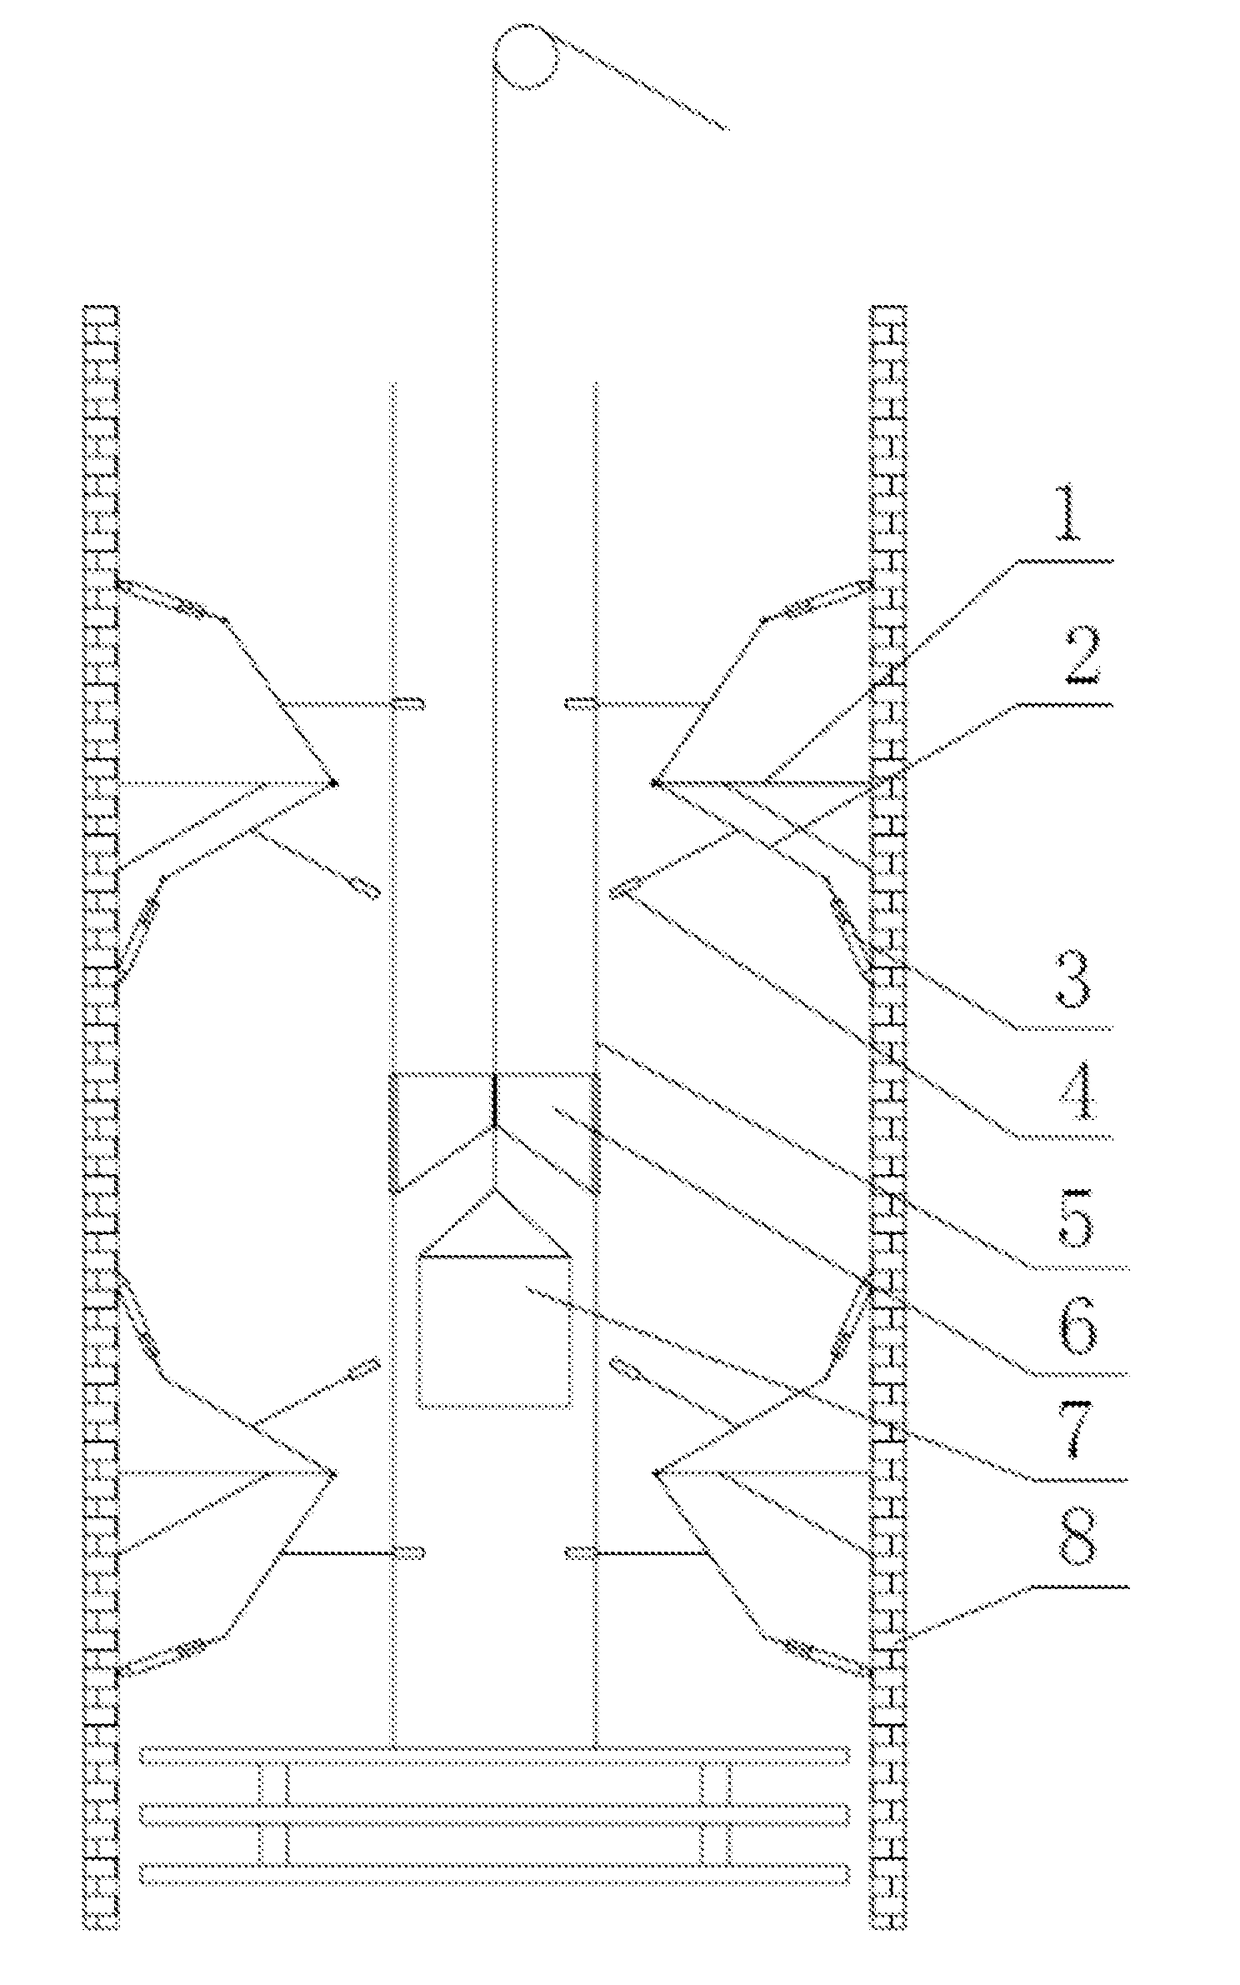 Guide rail rope deflection inhibition mechanism and method for parallel soft cable suspension system